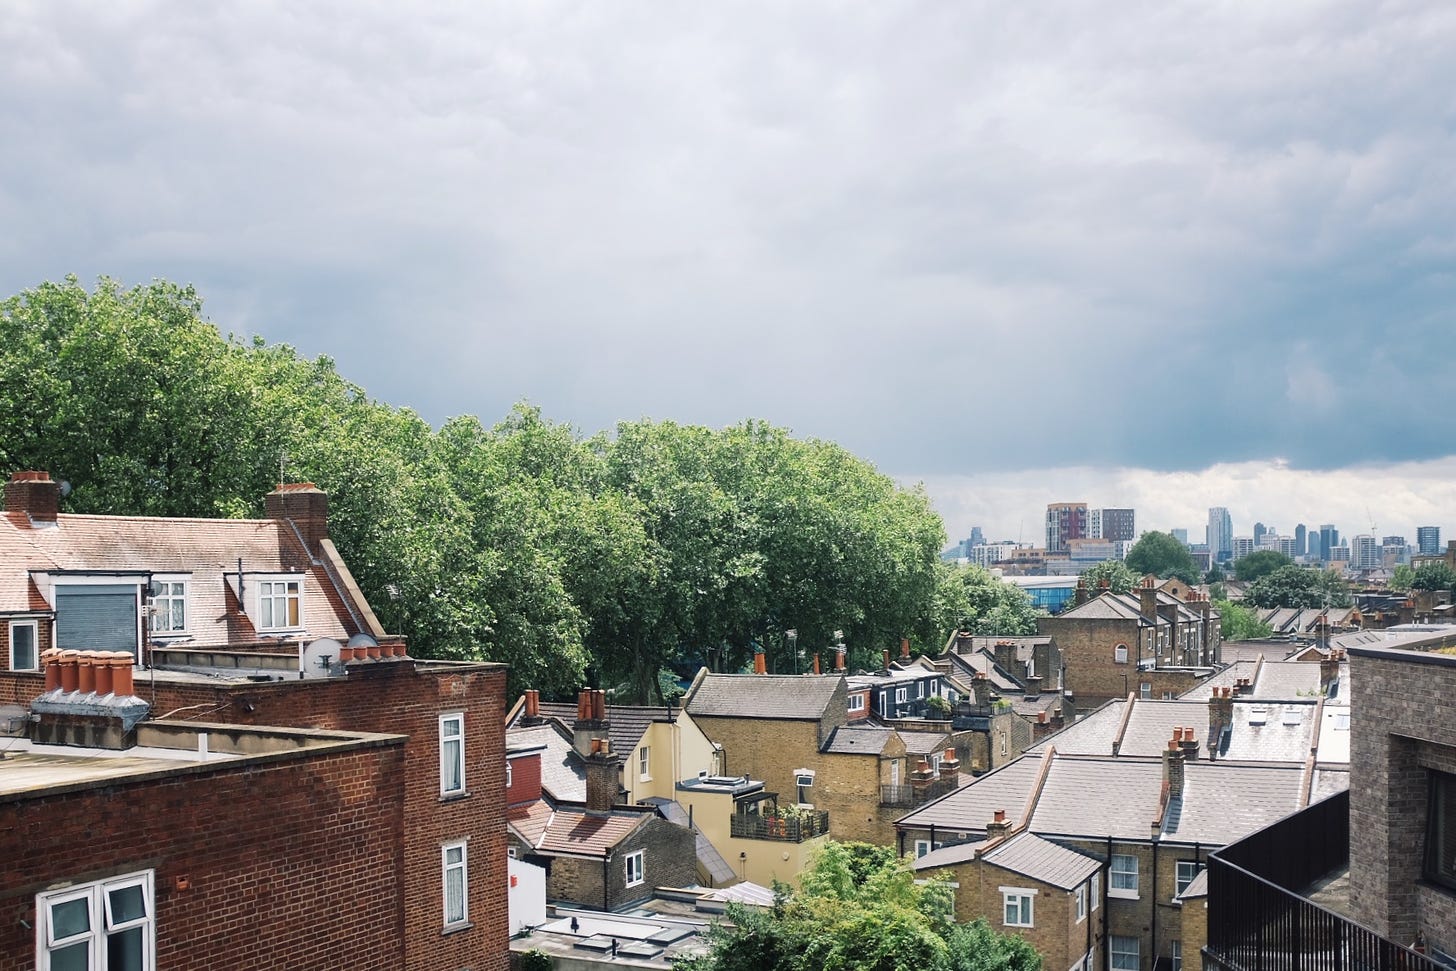 suburban rooftops in london, with a line of plane trees and a thundery sky in the background. There are many red-bricked buildings and tiled roofs, with a line of taller city towers on the horizon. The leaves on the trees are green and lit with sunlight.